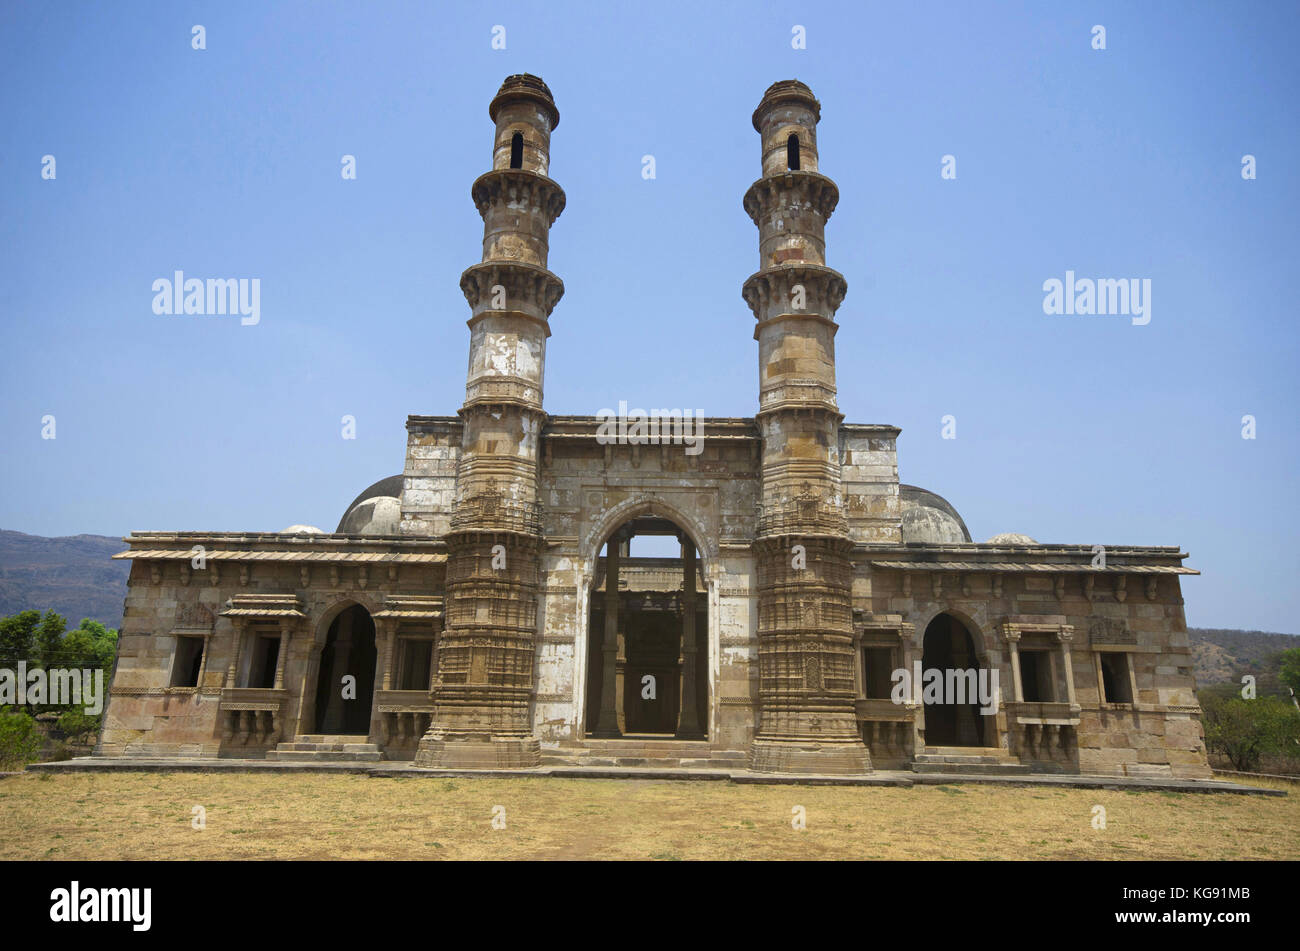 Outer view of Kevada Masjid (Mosque), has minarets, globe like domes and narrow stairs. Built in Champaner during the time of Mahmud Begada, UNESCO pr Stock Photo